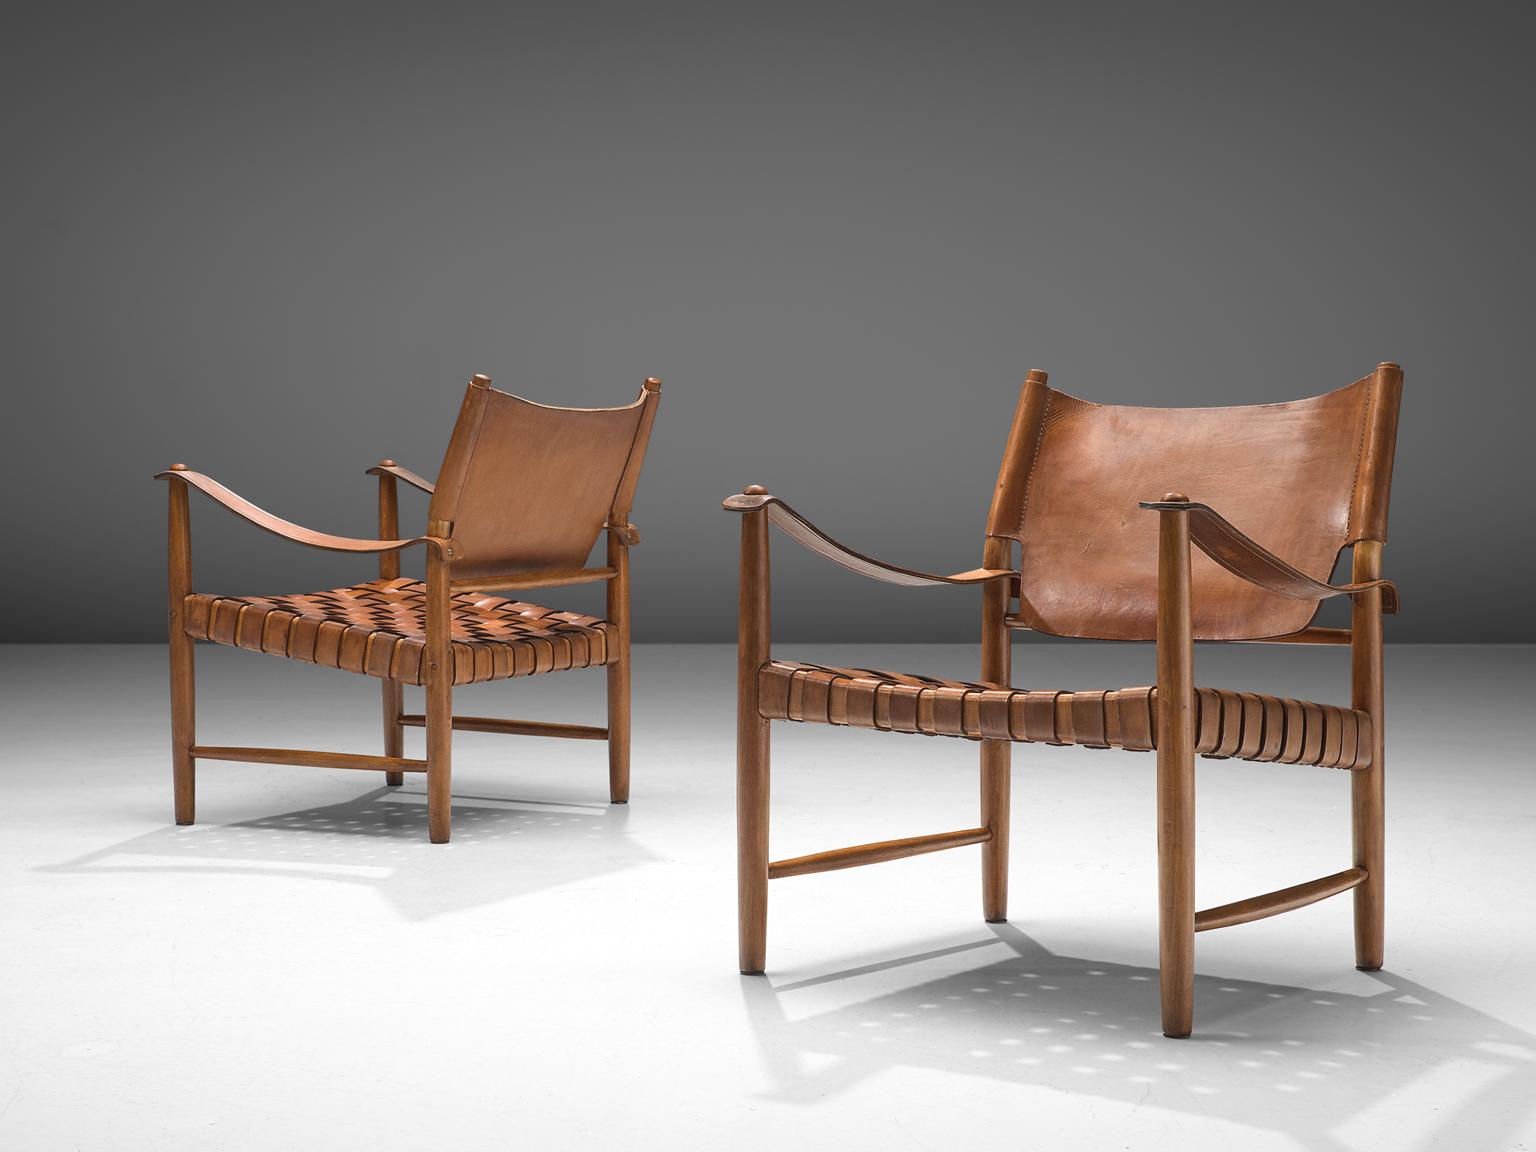 Safari chairs, patinated leather, beech, Denmark, 1950s

These elegant safari chairs features wonderful patinated leather on both the seat and back. The patina on the chairs create a vibrant look and the straps in the seat form a thick,